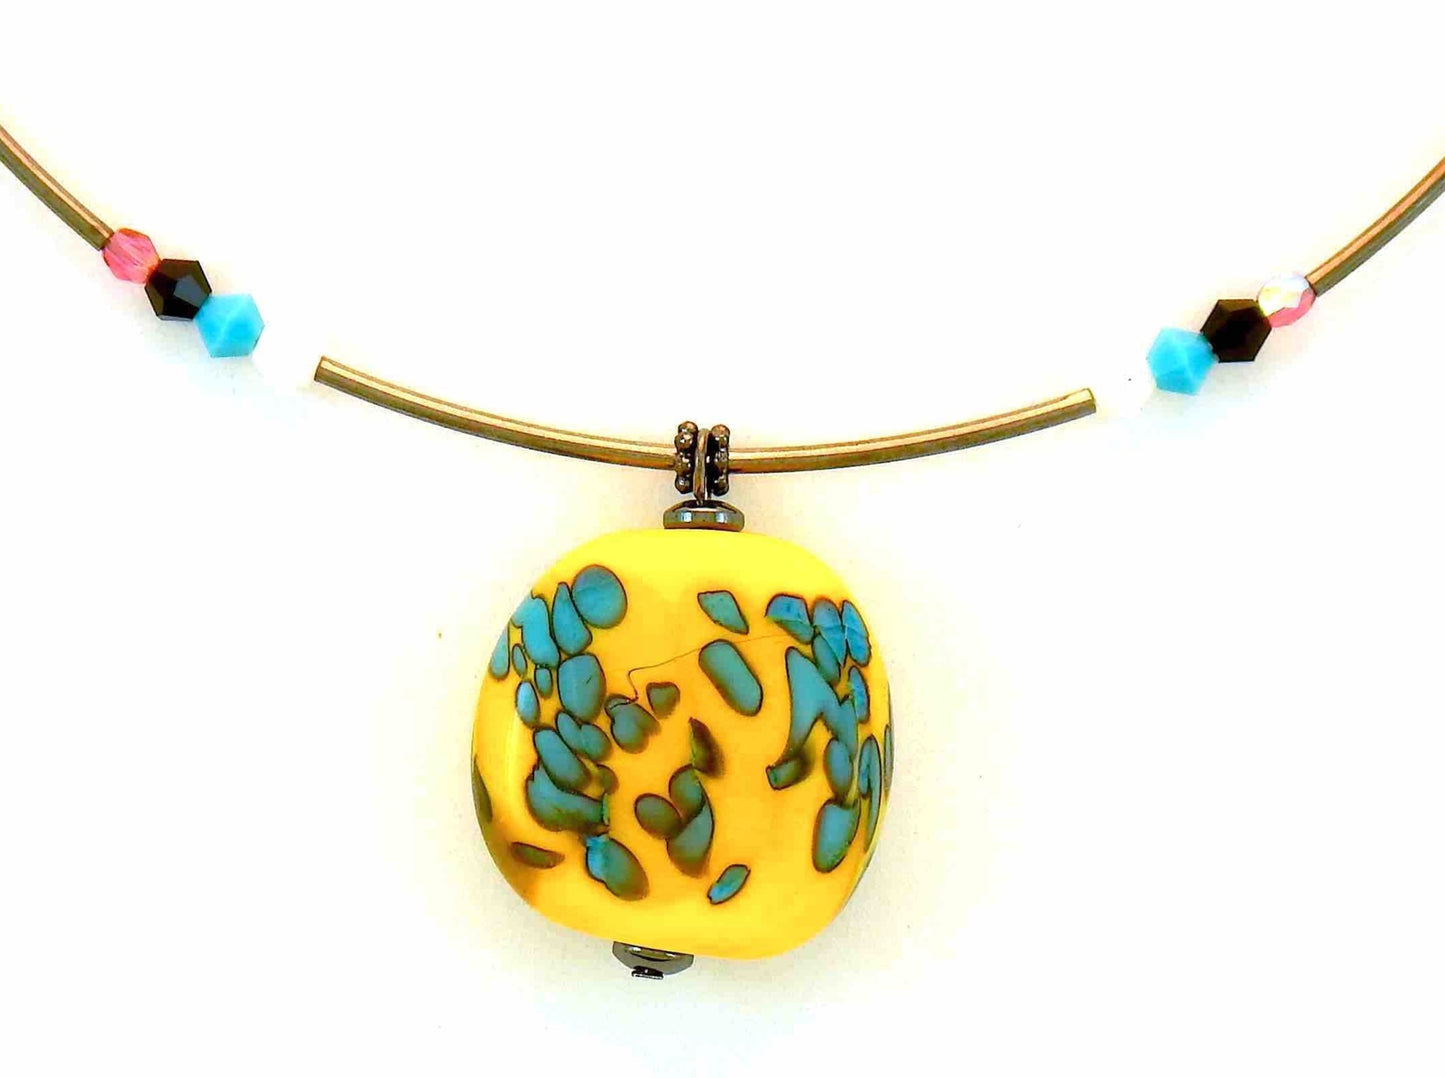 11-inch necklace with bright yellow-pink-blue-white modern art style pendant (Murano-style glass handmade in Montreal), matching Swarovski crystals, hoop design, pink aluminum chain